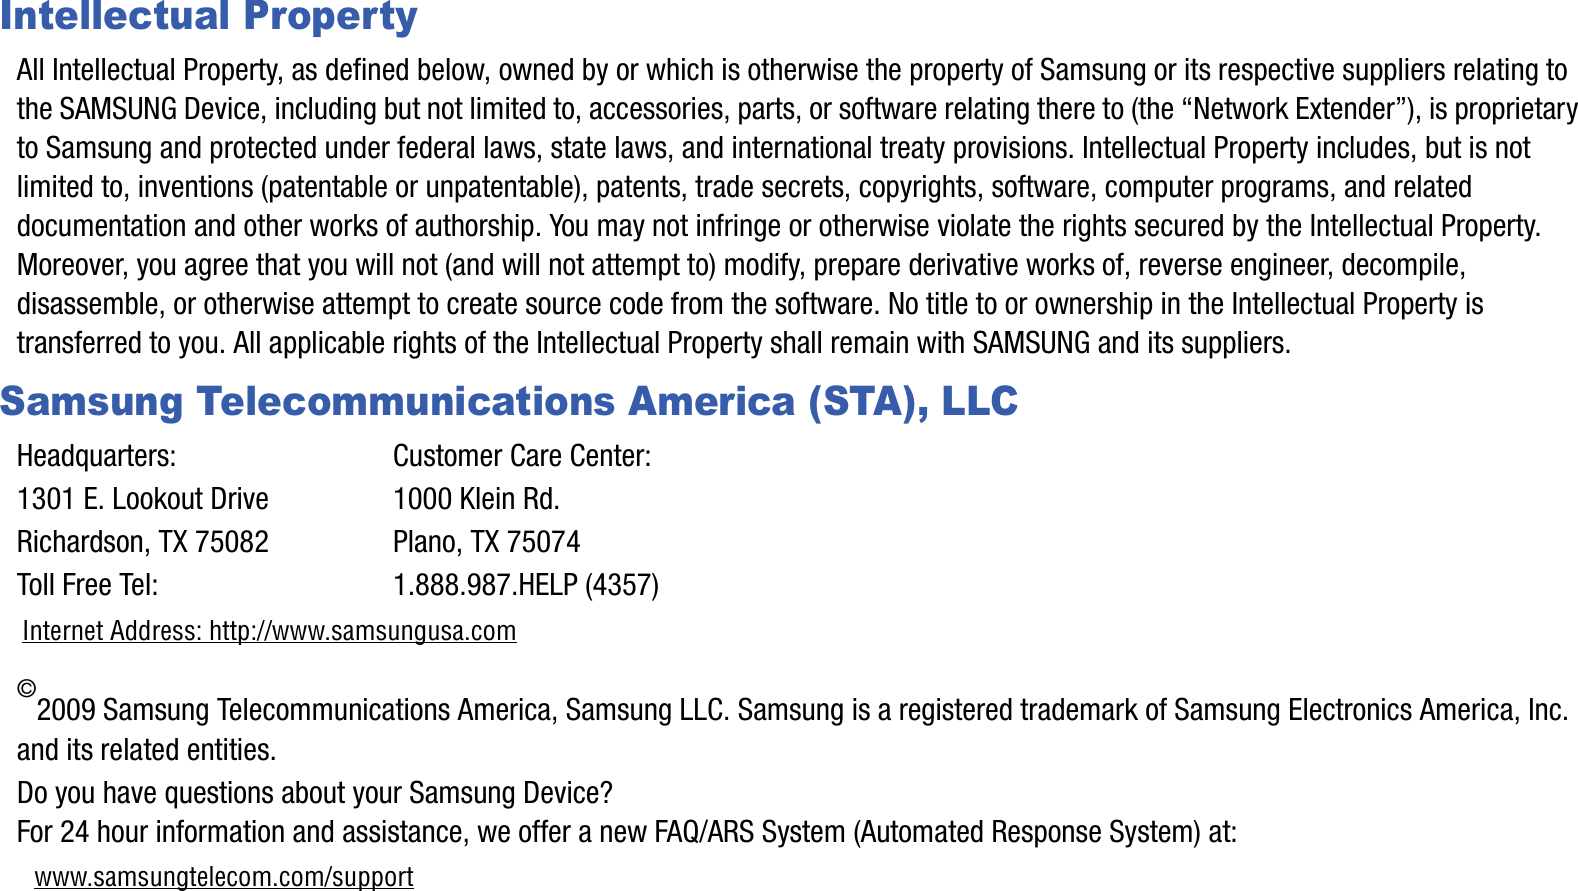 Intellectual PropertyAll Intellectual Property, as defined below, owned by or which is otherwise the property of Samsung or its respective suppliers relating to the SAMSUNG Device, including but not limited to, accessories, parts, or software relating there to (the “Network Extender”), is proprietary to Samsung and protected under federal laws, state laws, and international treaty provisions. Intellectual Property includes, but is not limited to, inventions (patentable or unpatentable), patents, trade secrets, copyrights, software, computer programs, and relateddocumentation and other works of authorship. You may not infringe or otherwise violate the rights secured by the Intellectual Property. Moreover, you agree that you will not (and will not attempt to) modify, prepare derivative works of, reverse engineer, decompile,disassemble, or otherwise attempt to create source code from the software. No title to or ownership in the Intellectual Property is transferred to you. All applicable rights of the Intellectual Property shall remain with SAMSUNG and its suppliers.Samsung Telecommunications America (STA), LLCHeadquarters: Customer Care Center:1301 E. Lookout Drive 1000 Klein Rd.Richardson, TX 75082 Plano, TX 75074Toll Free Tel:  1.888.987.HELP (4357)Internet Address: http://www.samsungusa.com©2009 Samsung Telecommunications America, Samsung LLC. Samsung is a registered trademark of Samsung Electronics America, Inc. and its related entities.Do you have questions about your Samsung Device? For 24 hour information and assistance, we offer a new FAQ/ARS System (Automated Response System) at:www.samsungtelecom.com/support